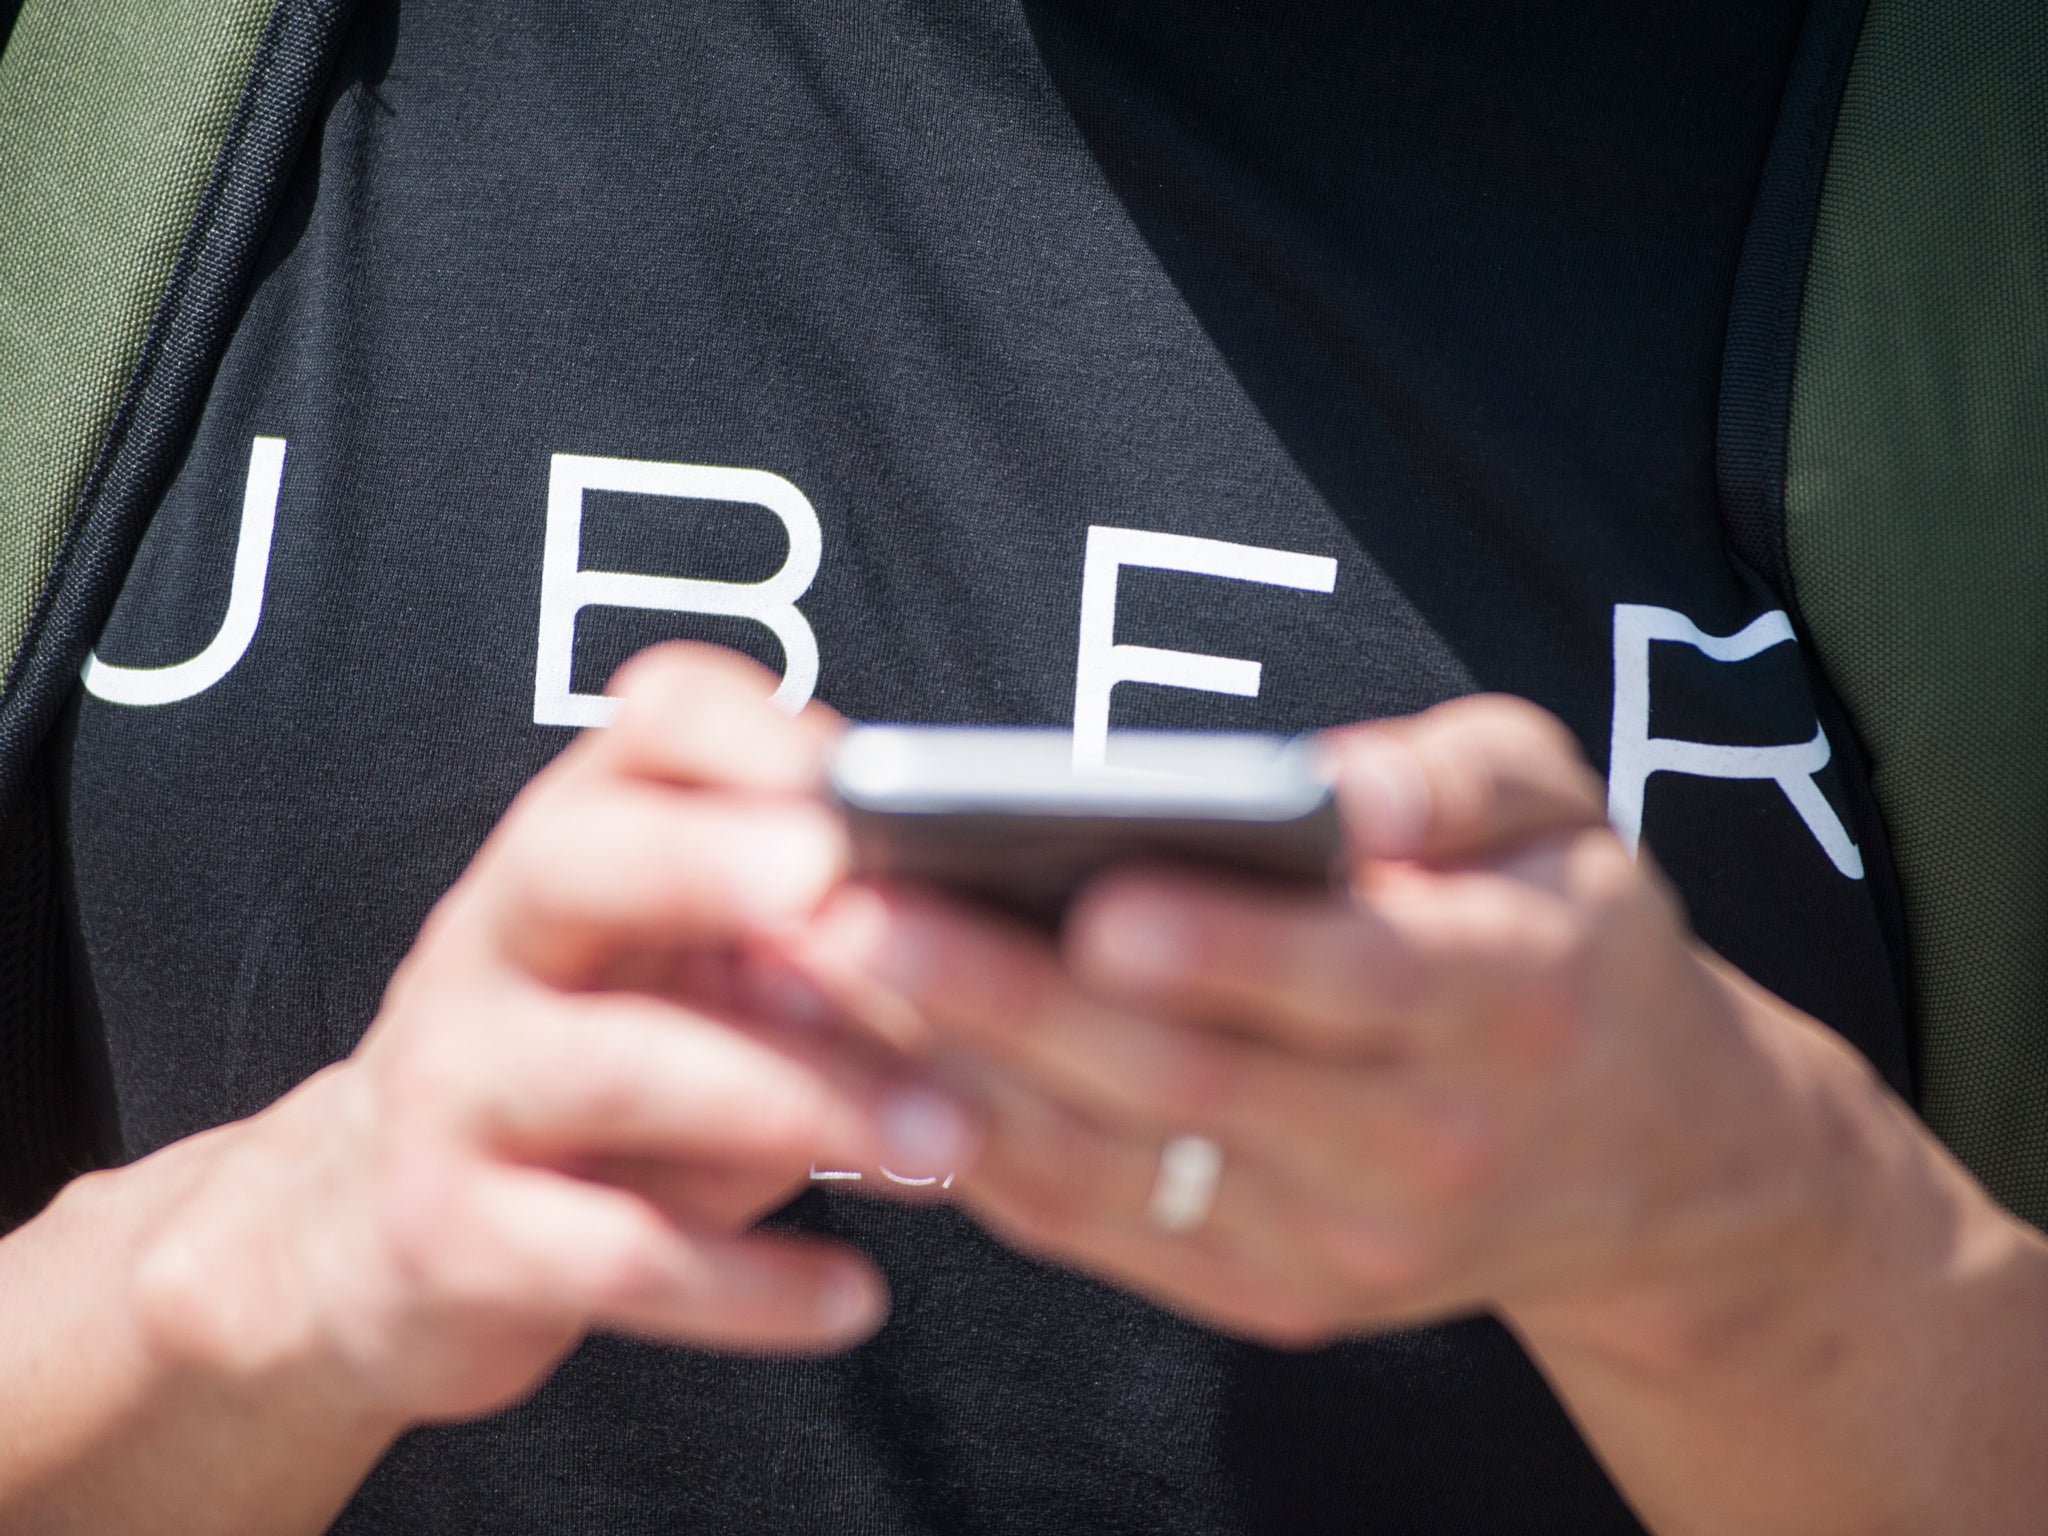 Uber has a wealth of data on its users - but says it takes this responsibility 'very seriously'